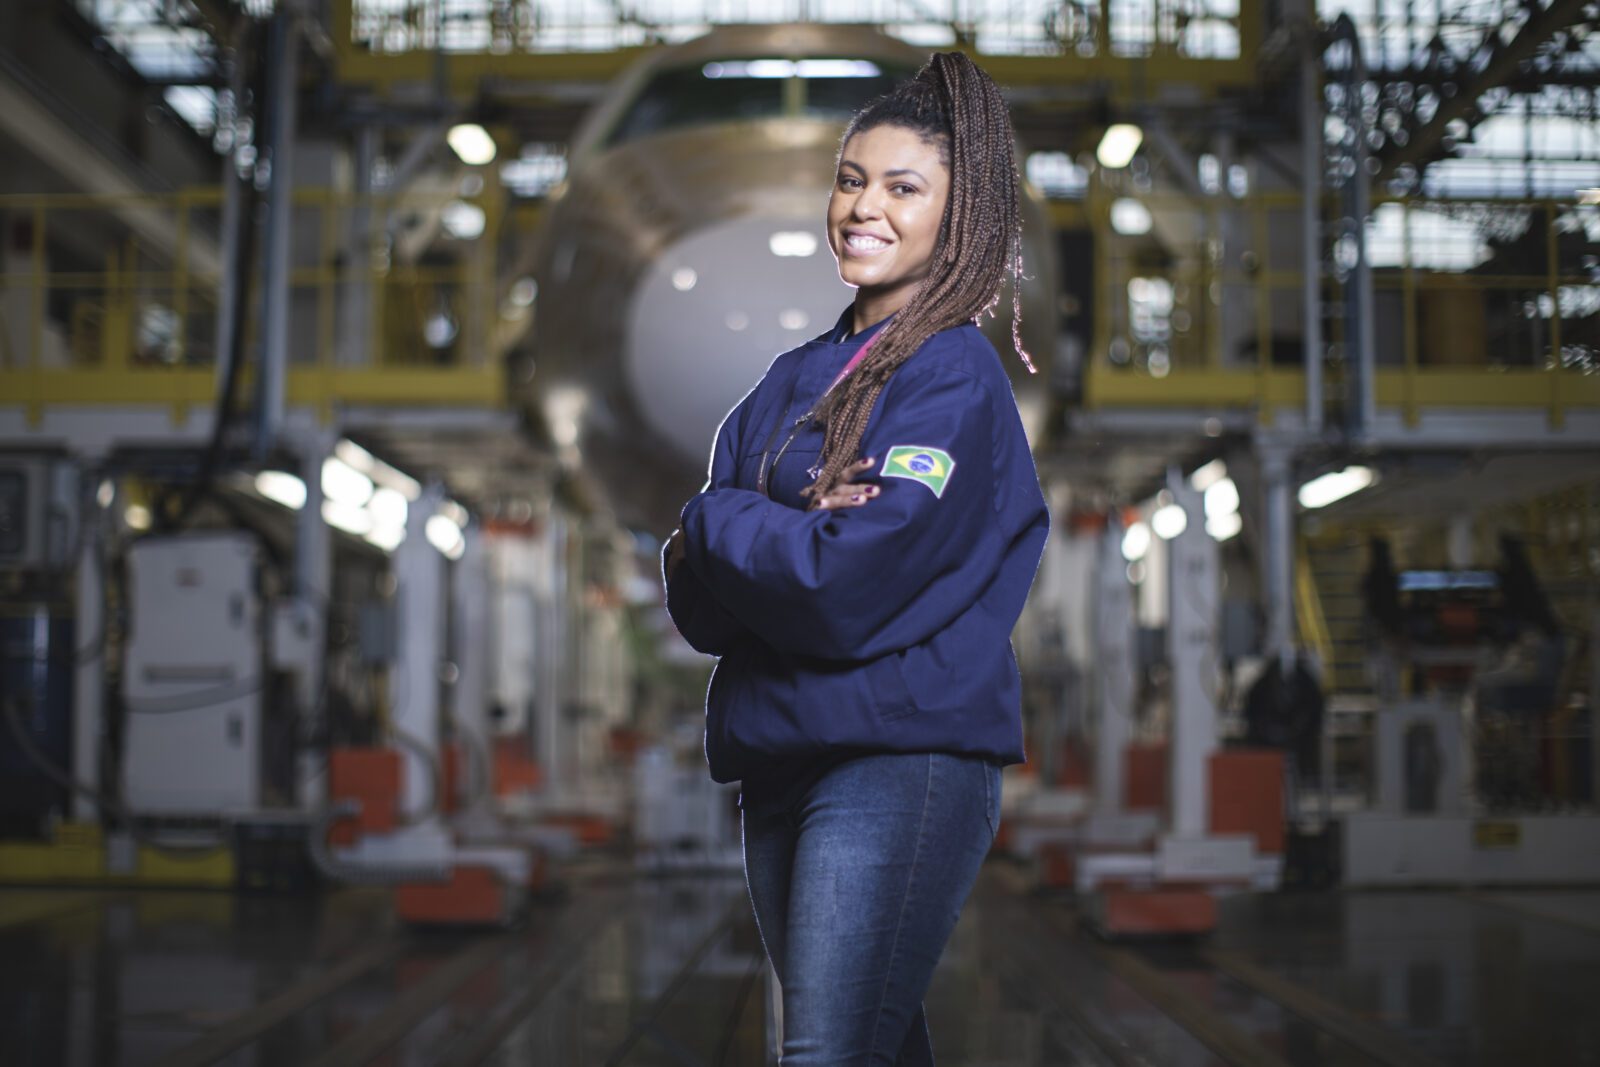 Embraer participates in the 1st International Congress of Women in STEAM